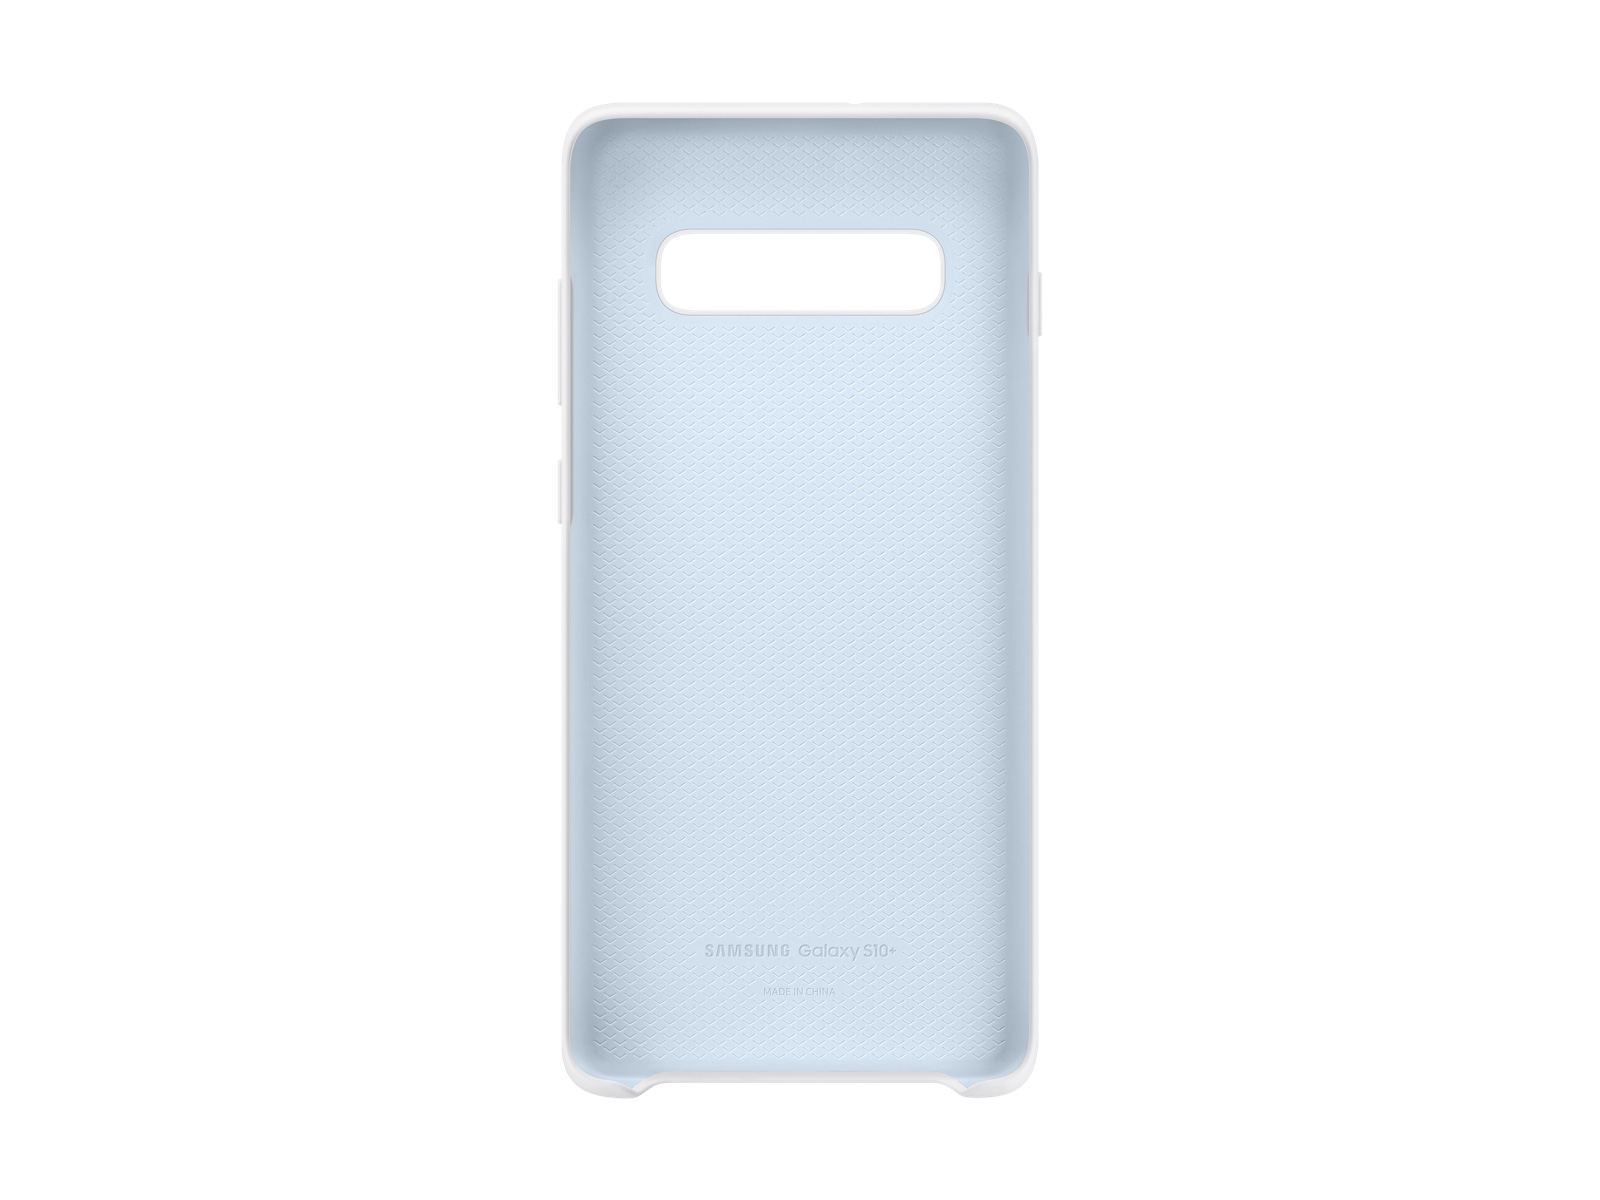 Thumbnail image of Galaxy S10+ Silicone Cover, White